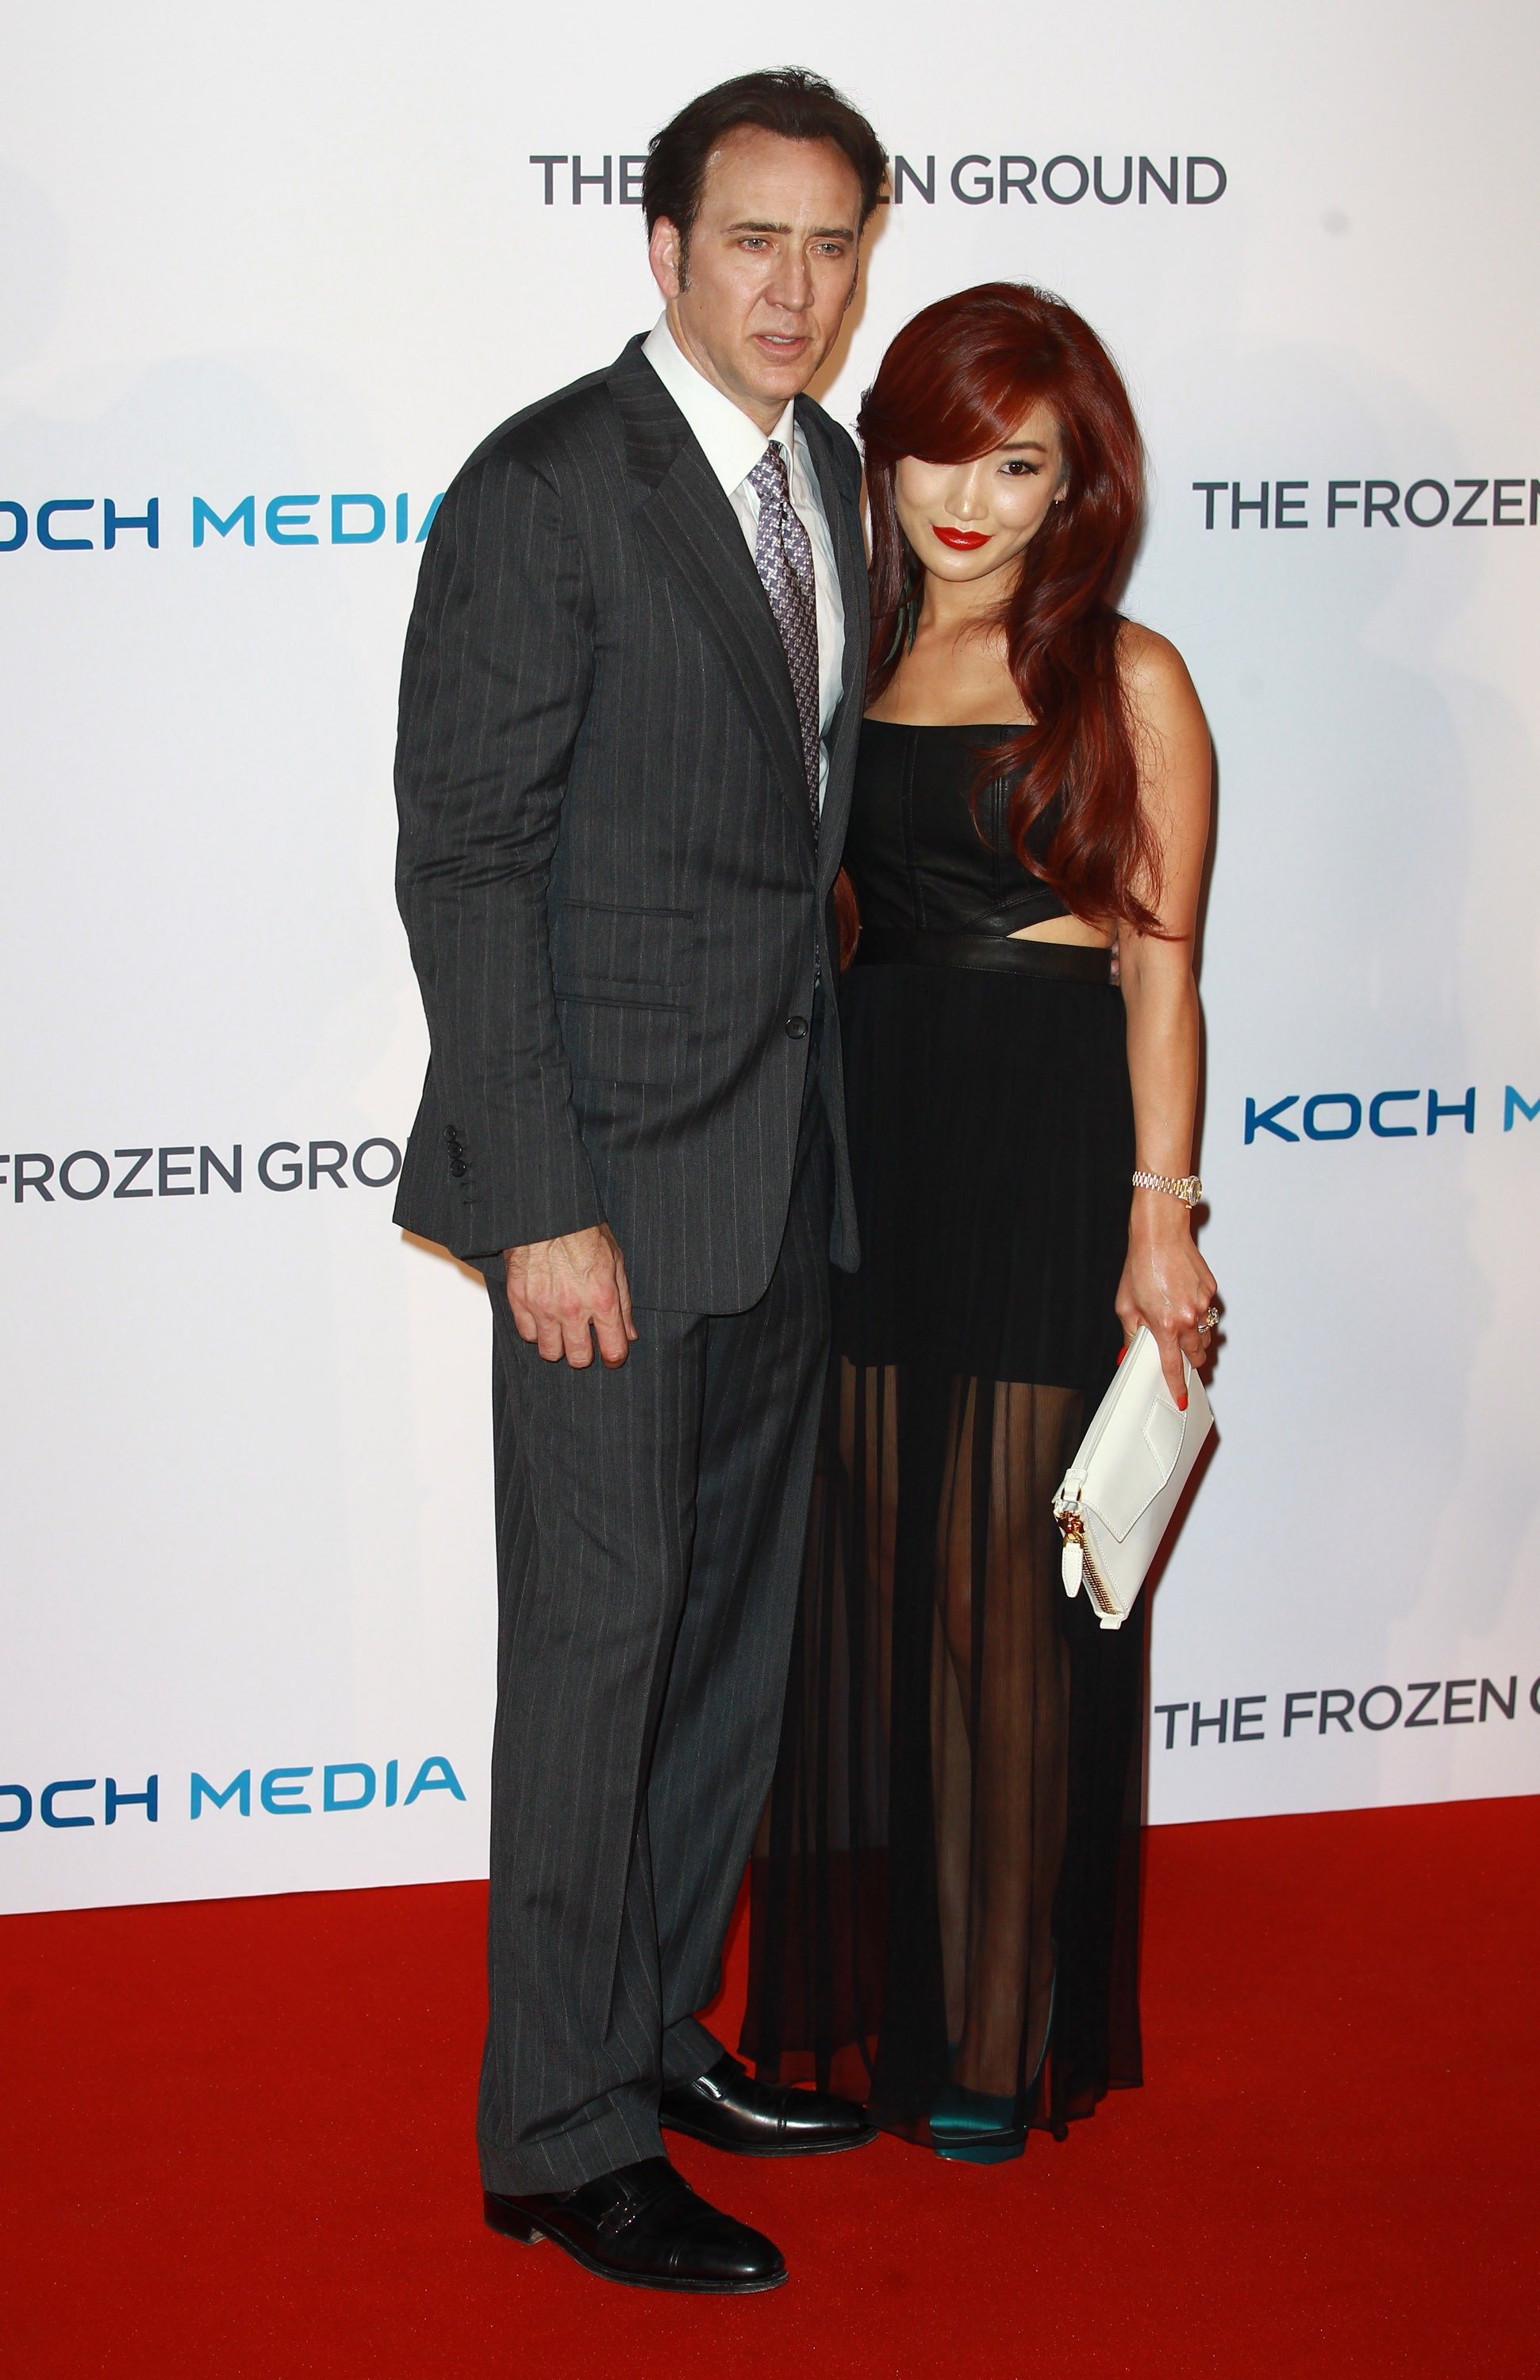 Alice Kim and Nicolas Cage the premiere of "The Frozen Ground" in London, England on July 17, 2013 | Source: Getty Images 